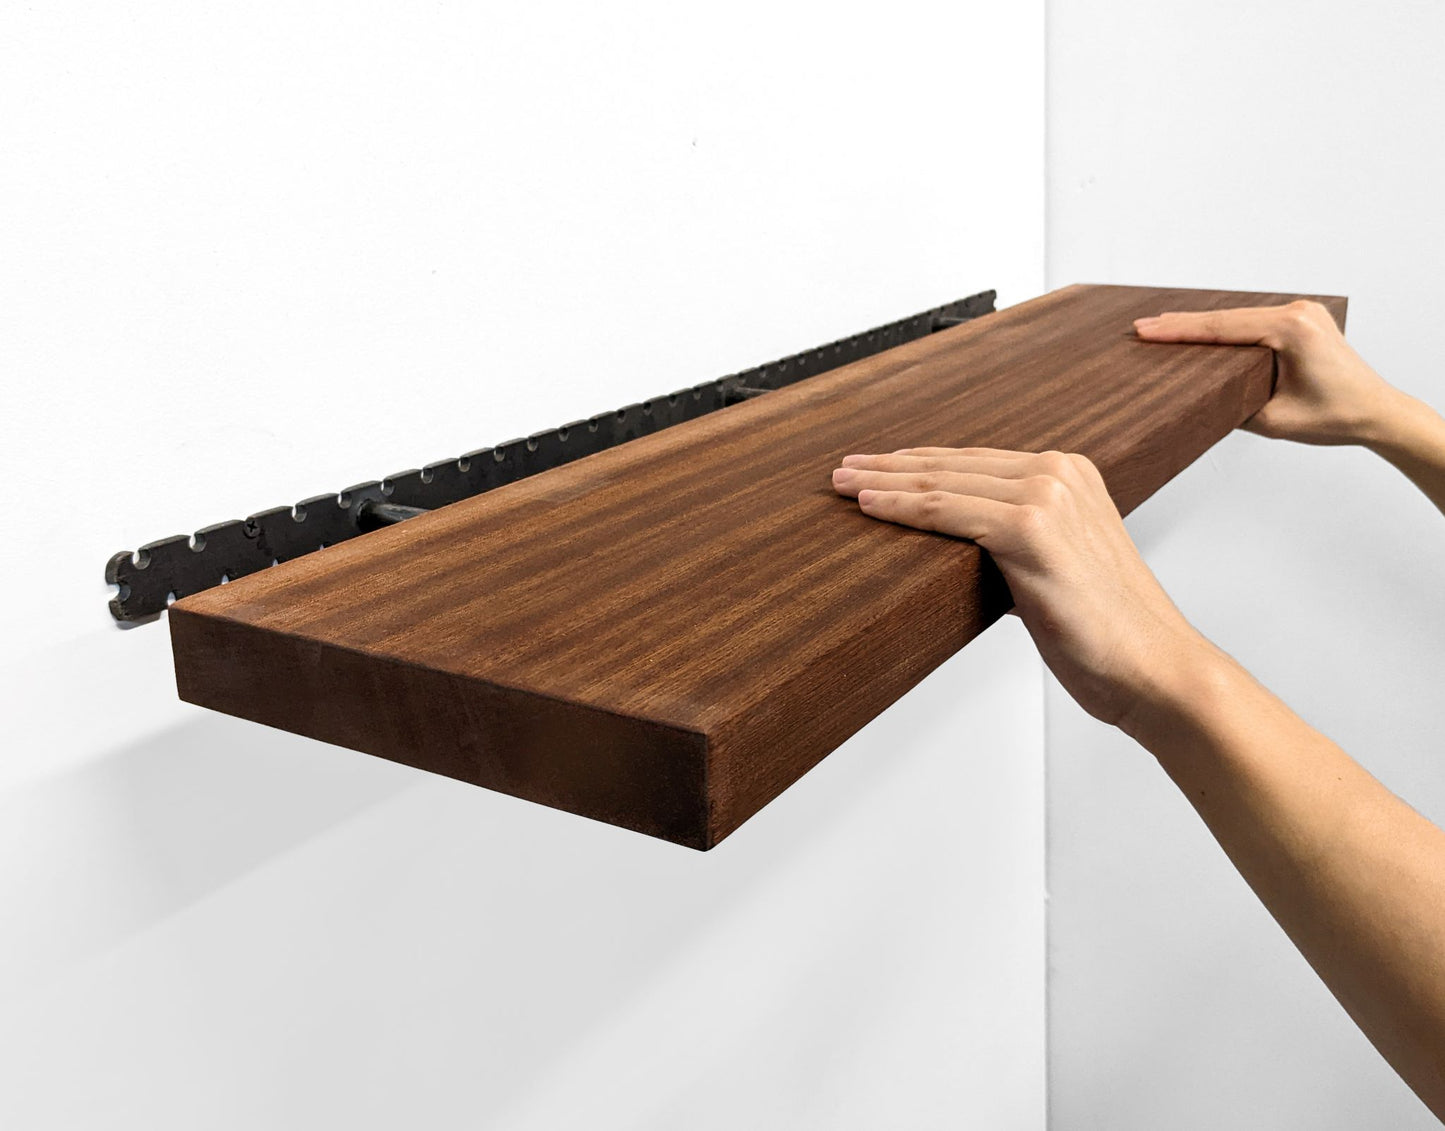 Two hands grip the front of a long wooden mahogany shelf and easily install it on the wall by sliding it onto black brackets.